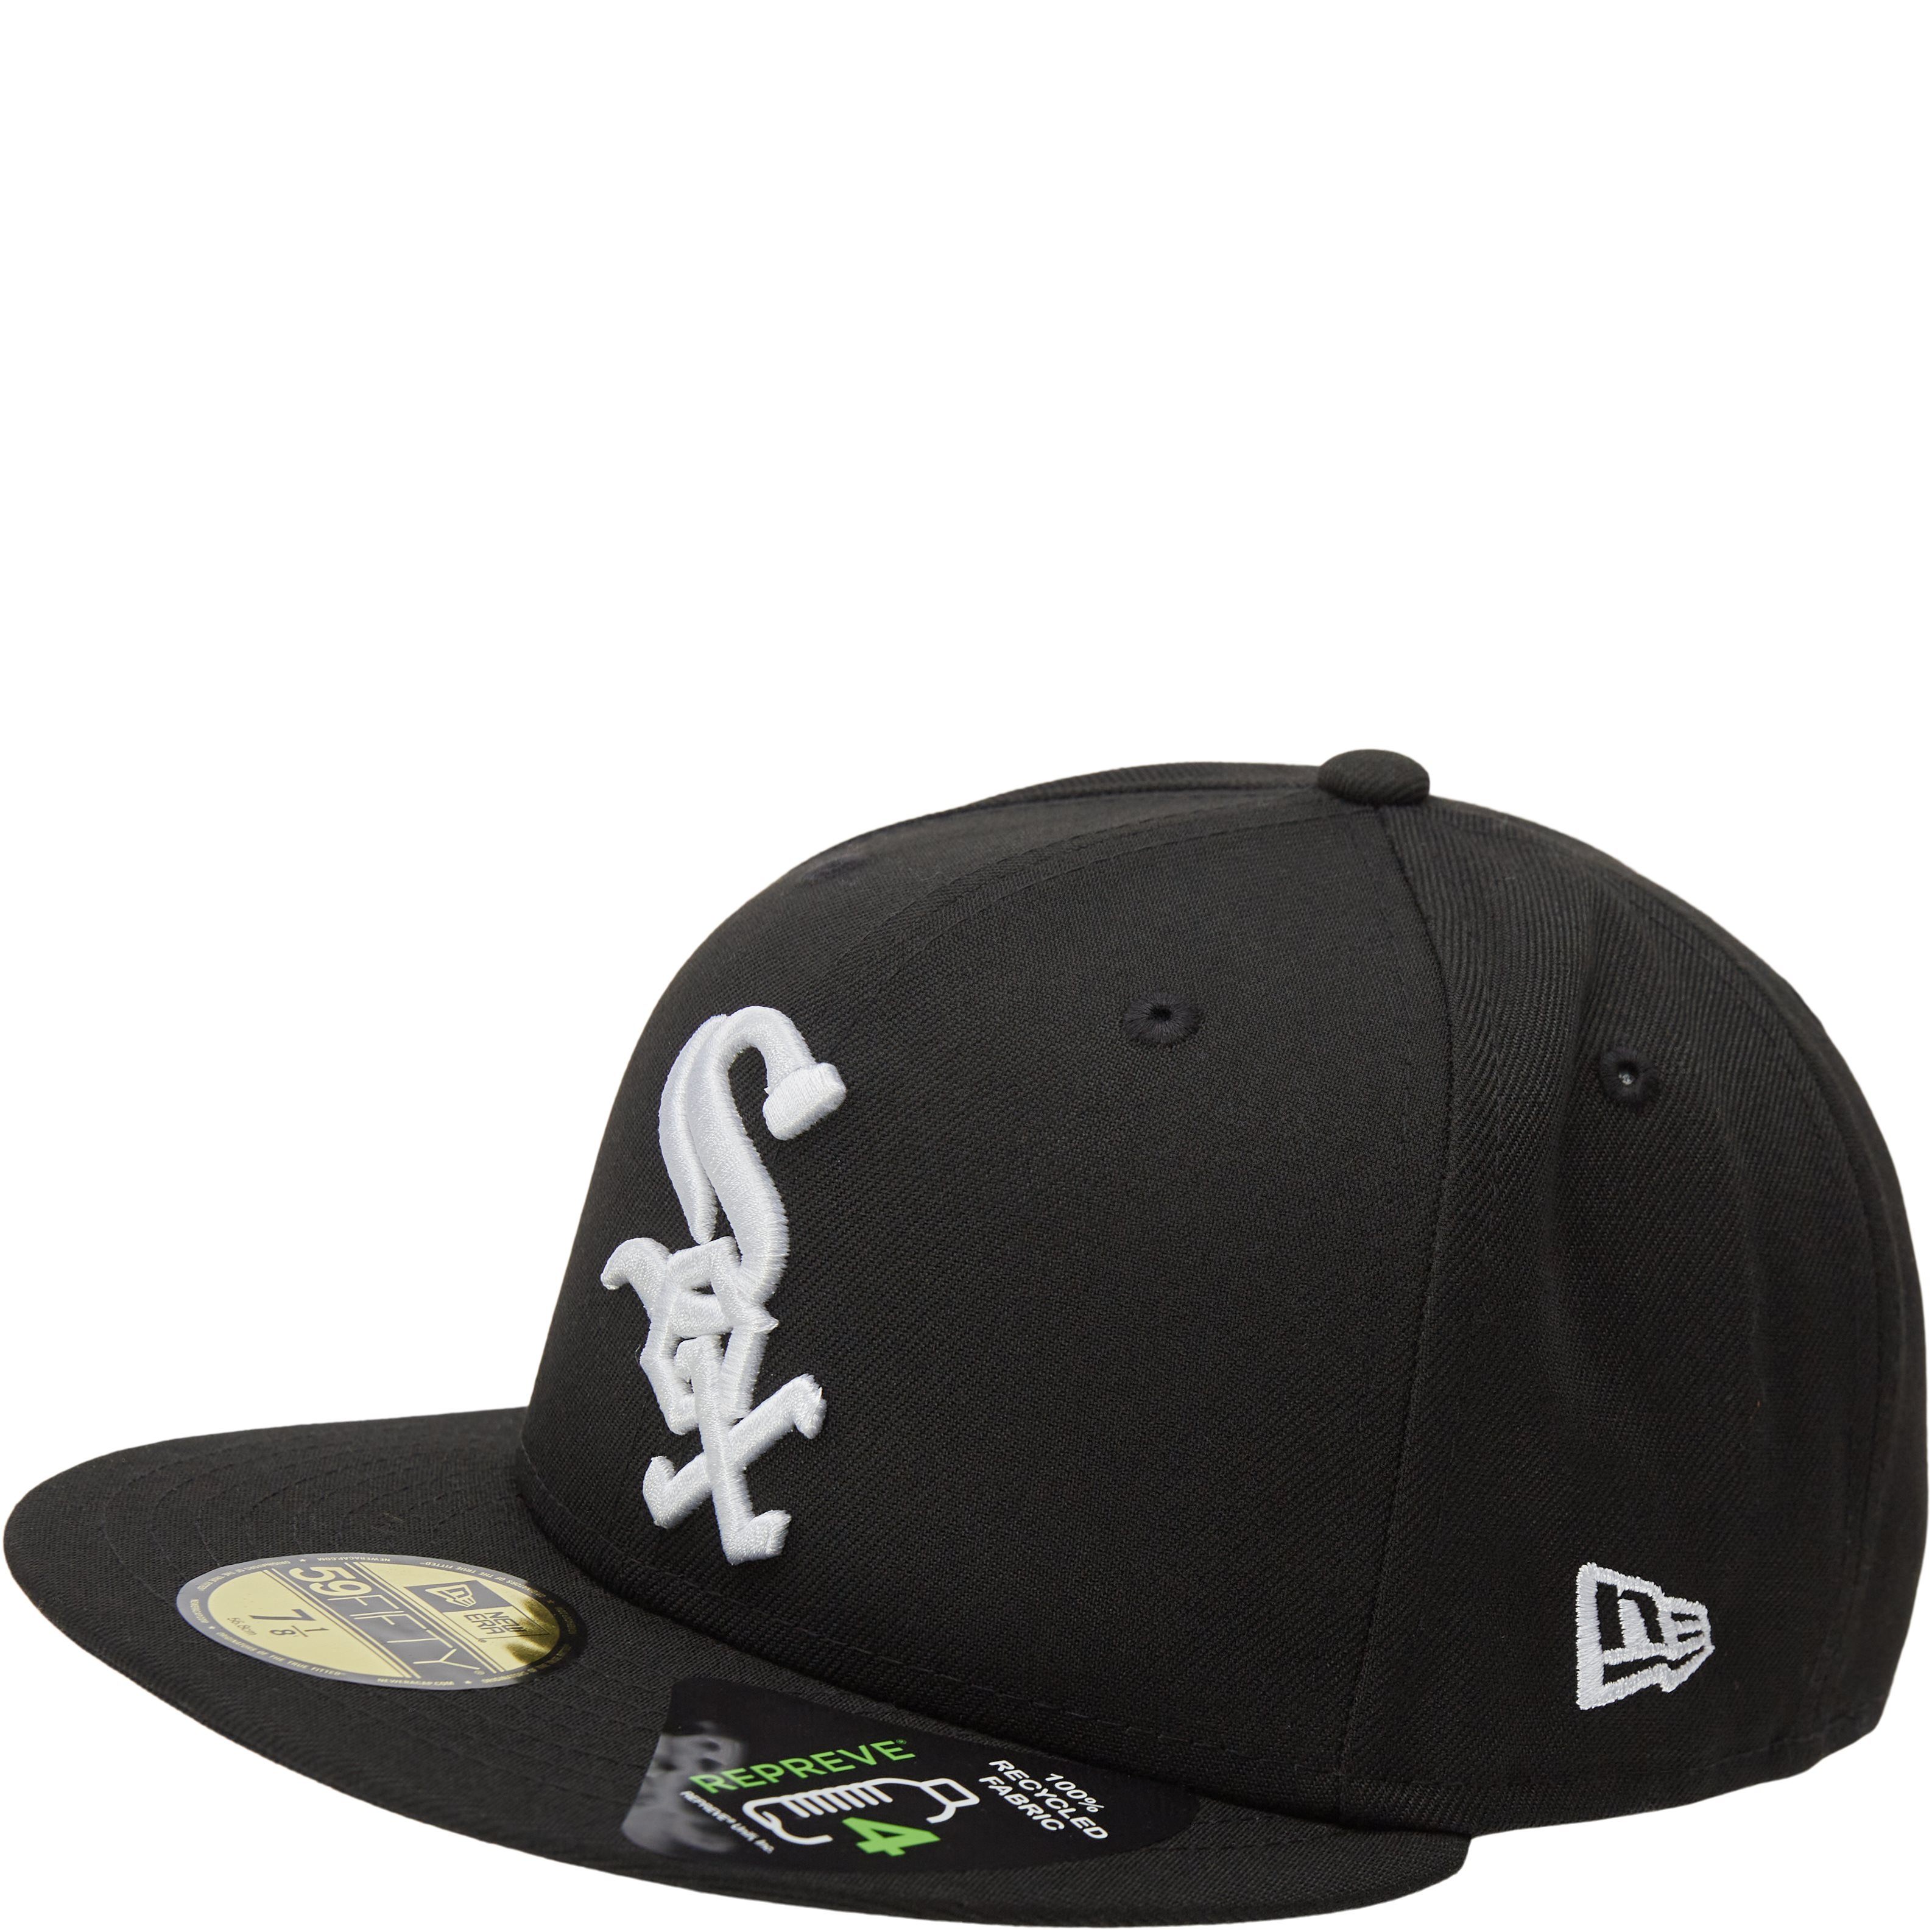 59 Fifty White Sox - Caps - Sort